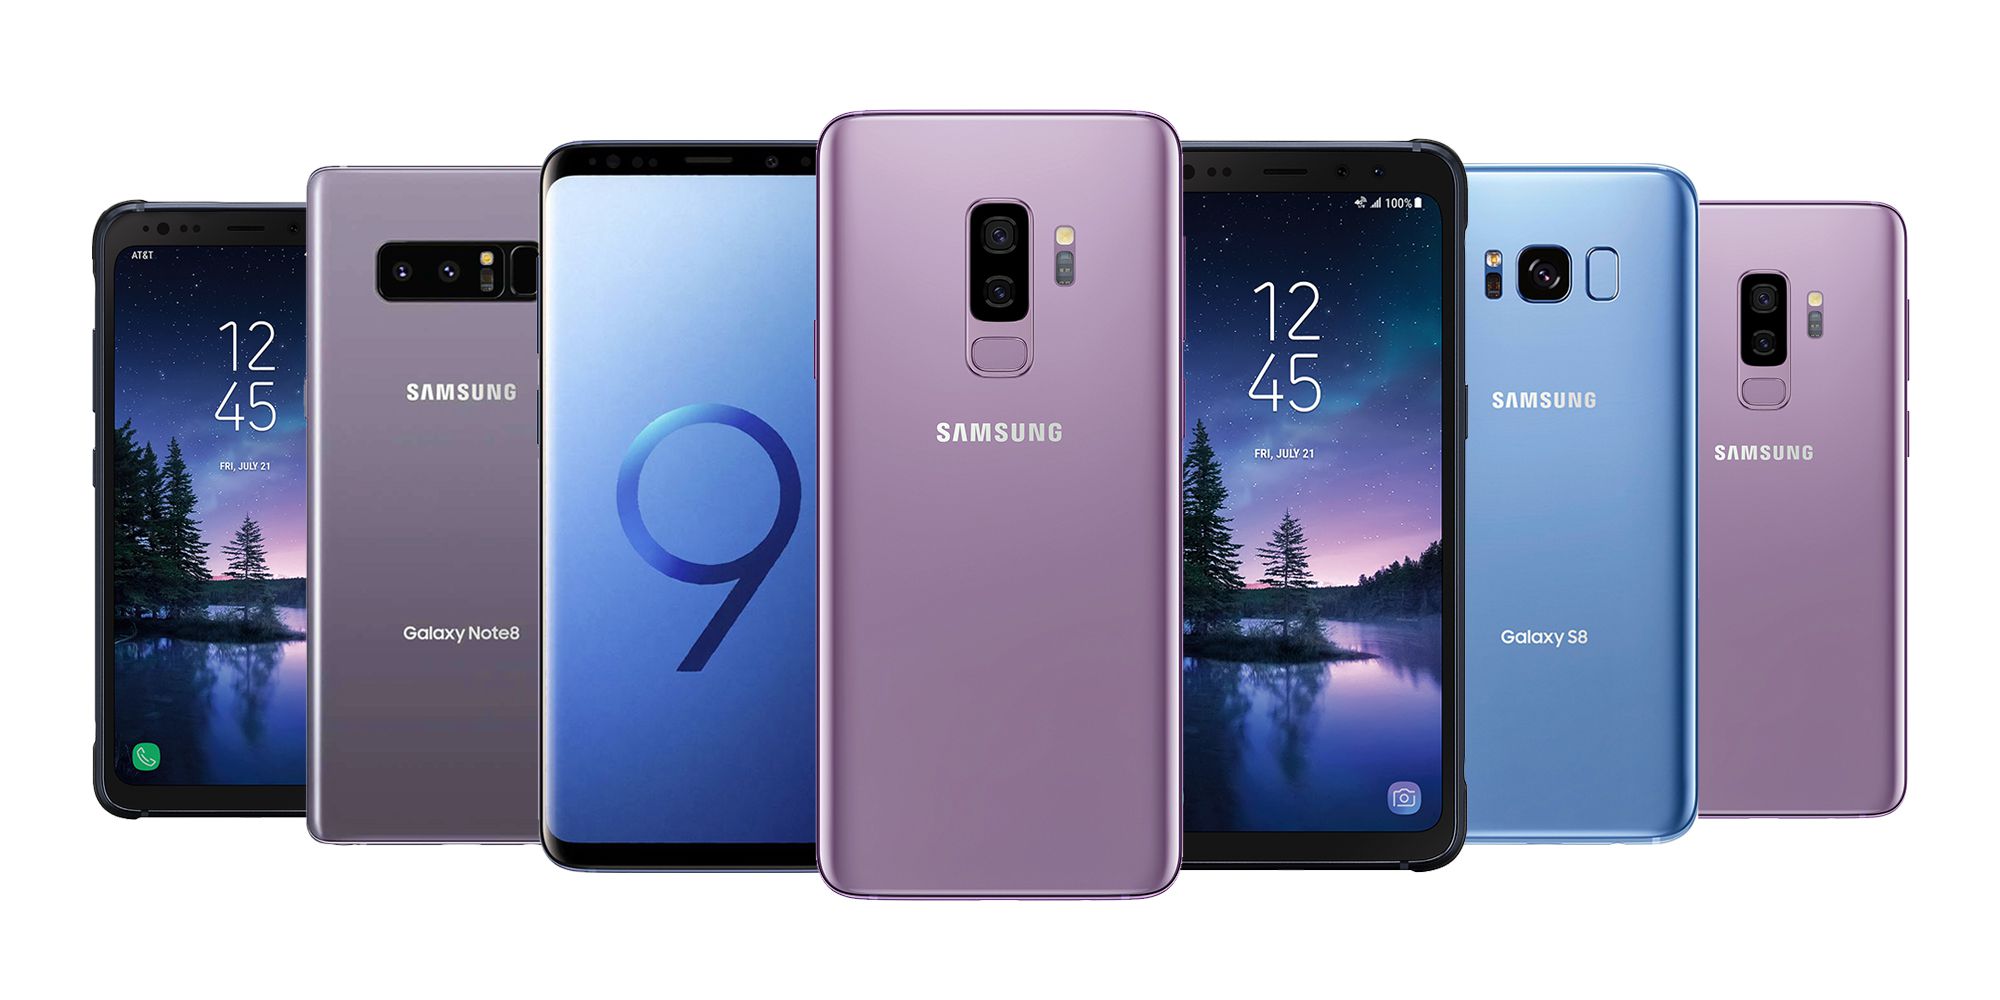 Top 4 Samsung Android Phones from Galaxy Range that Won’t Break the Bank